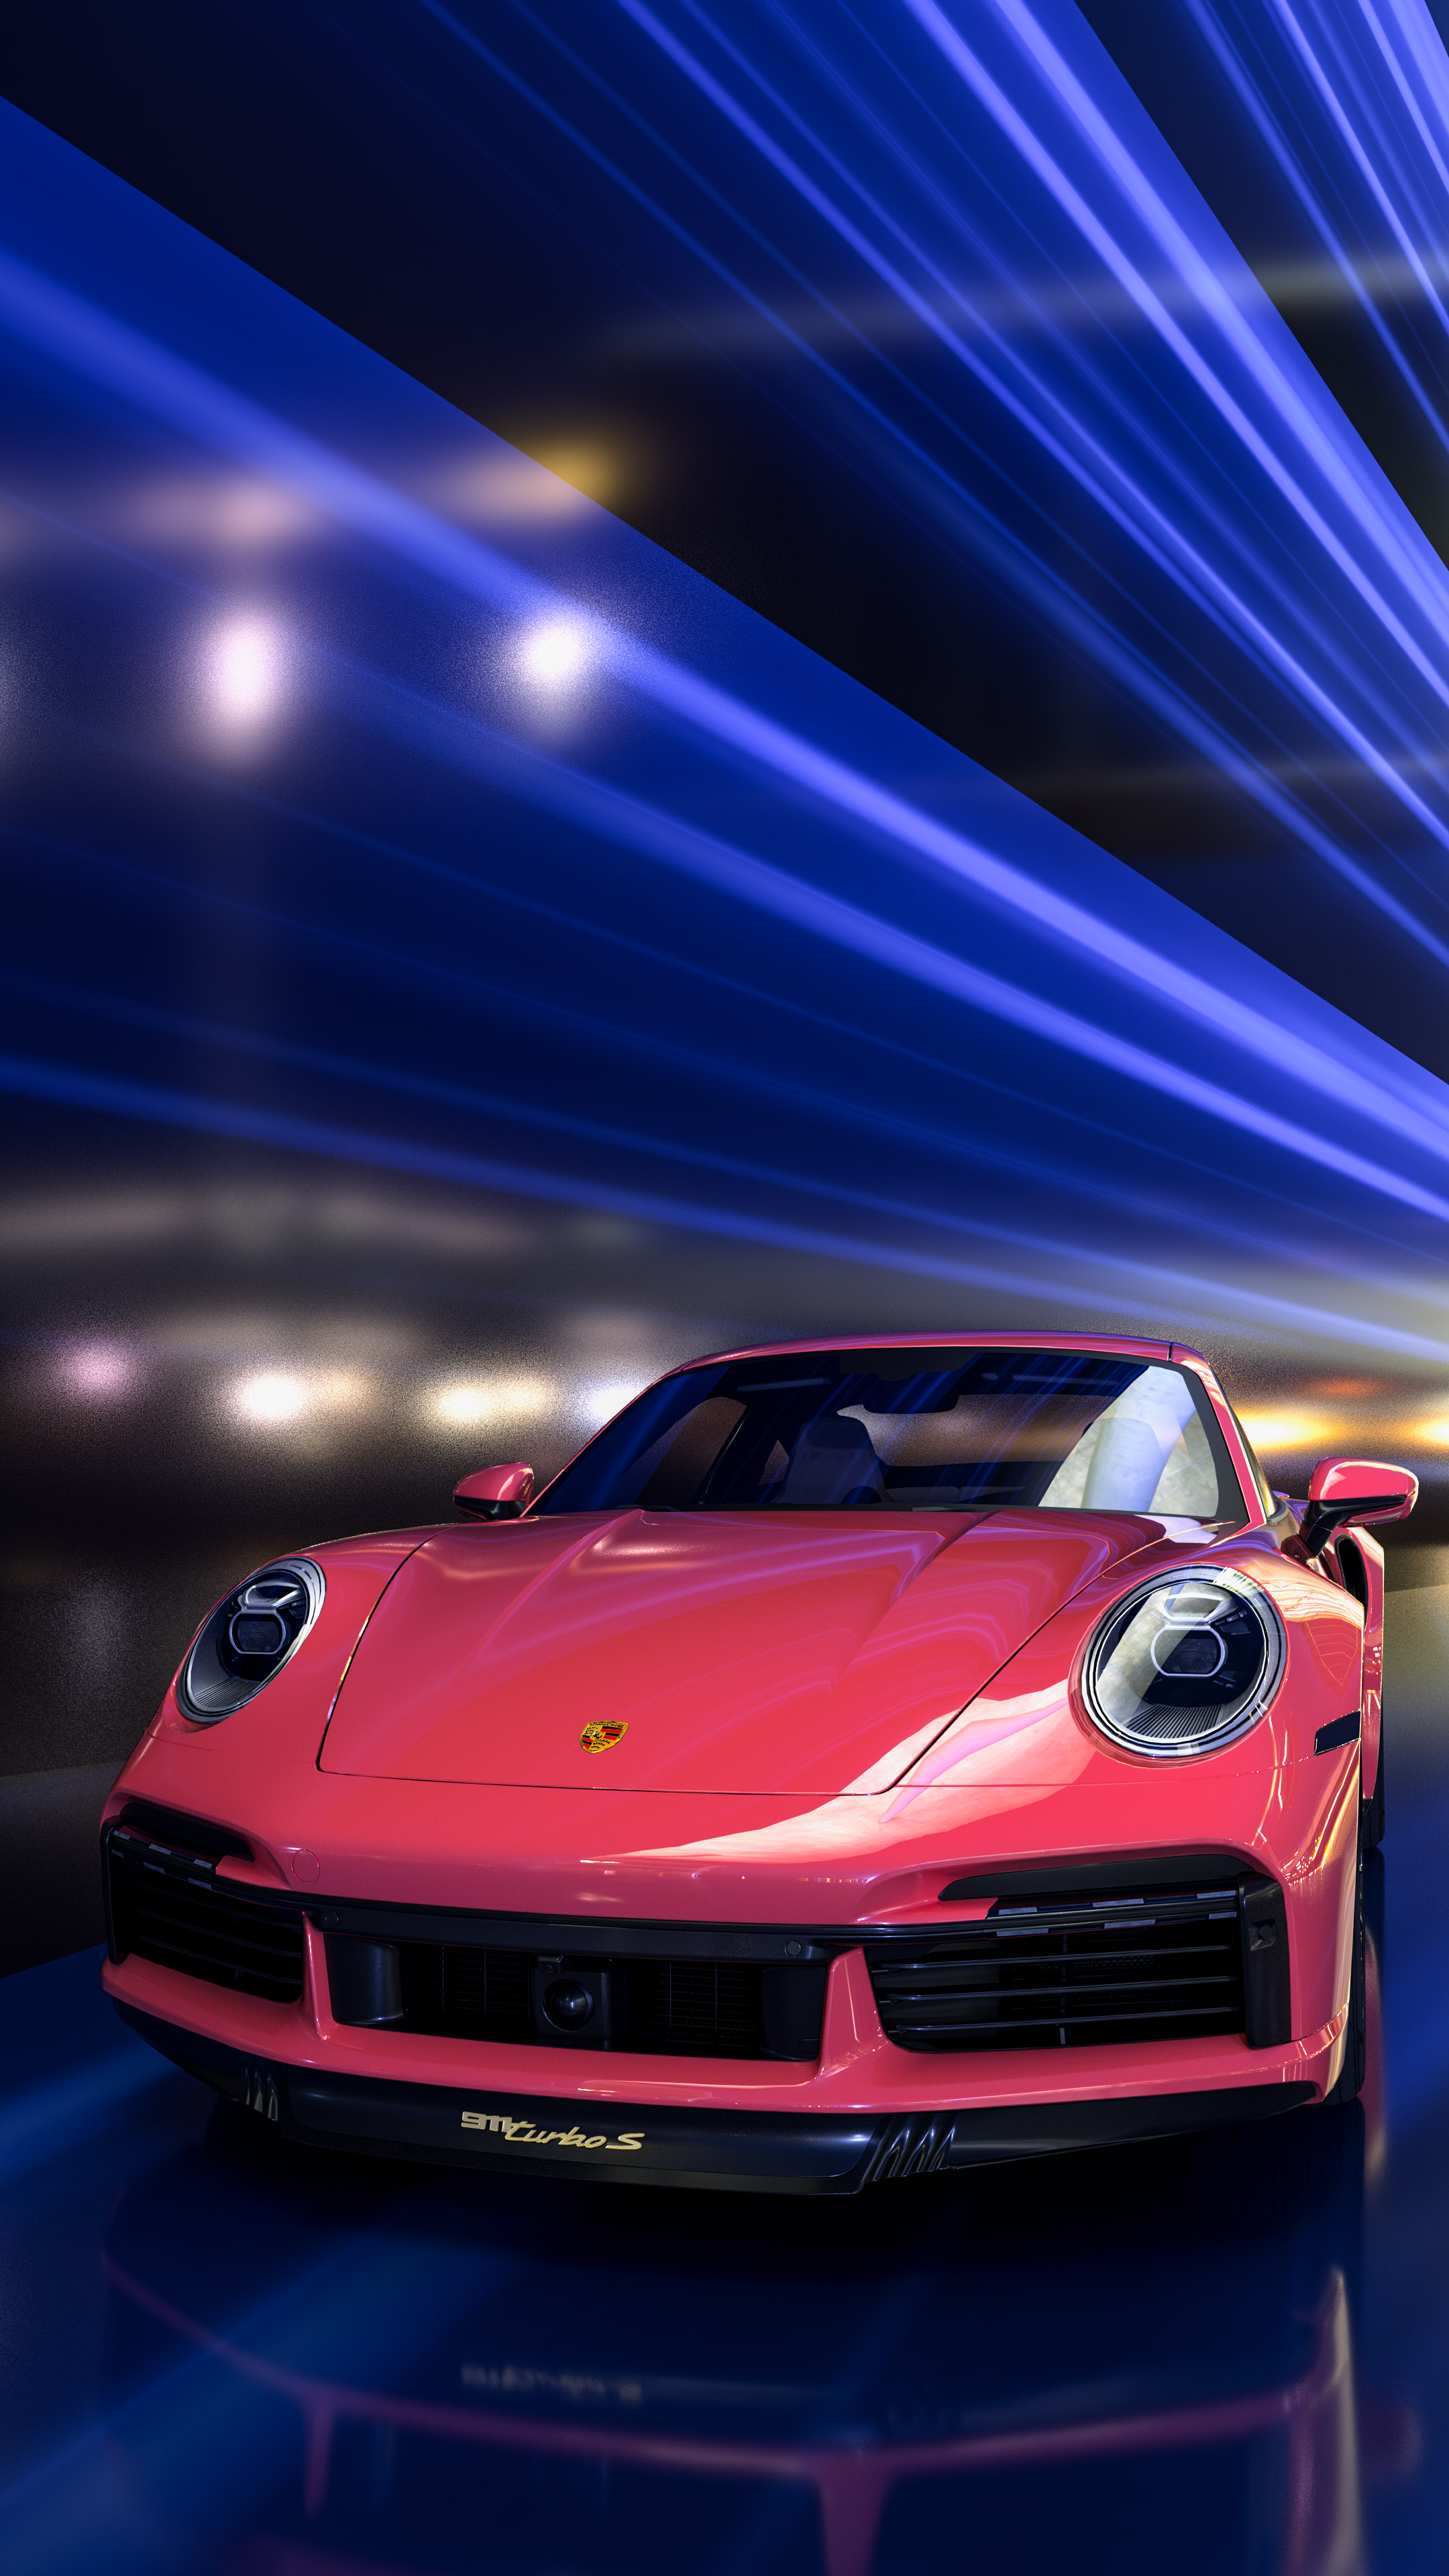 Immerse yourself in the 4K iPhone wallpaper, highlighting the Porsche 911, and witness automotive excellence in every detail, available for free download.